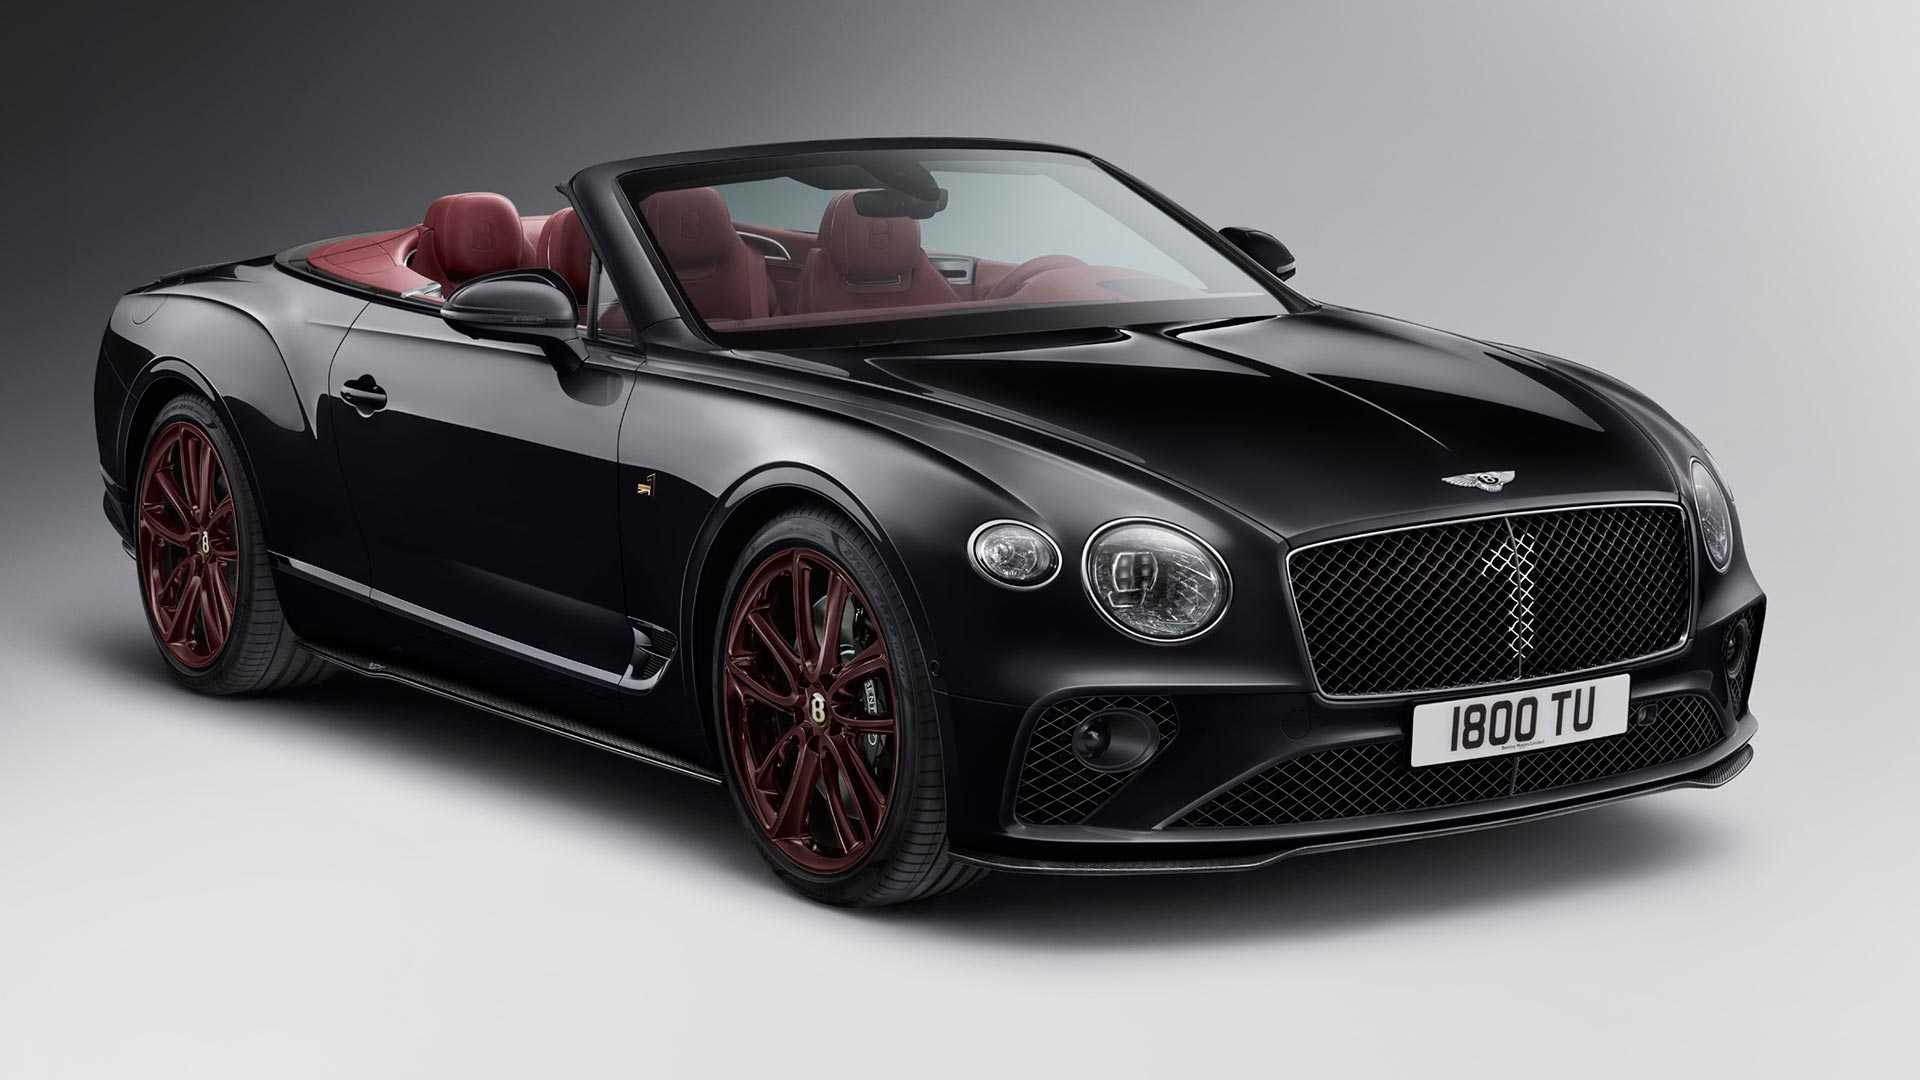 2020 Bentley Continental GT Convertible Number 1 Edition by Mulliner Front Three-Quarter Wallpapers (5)